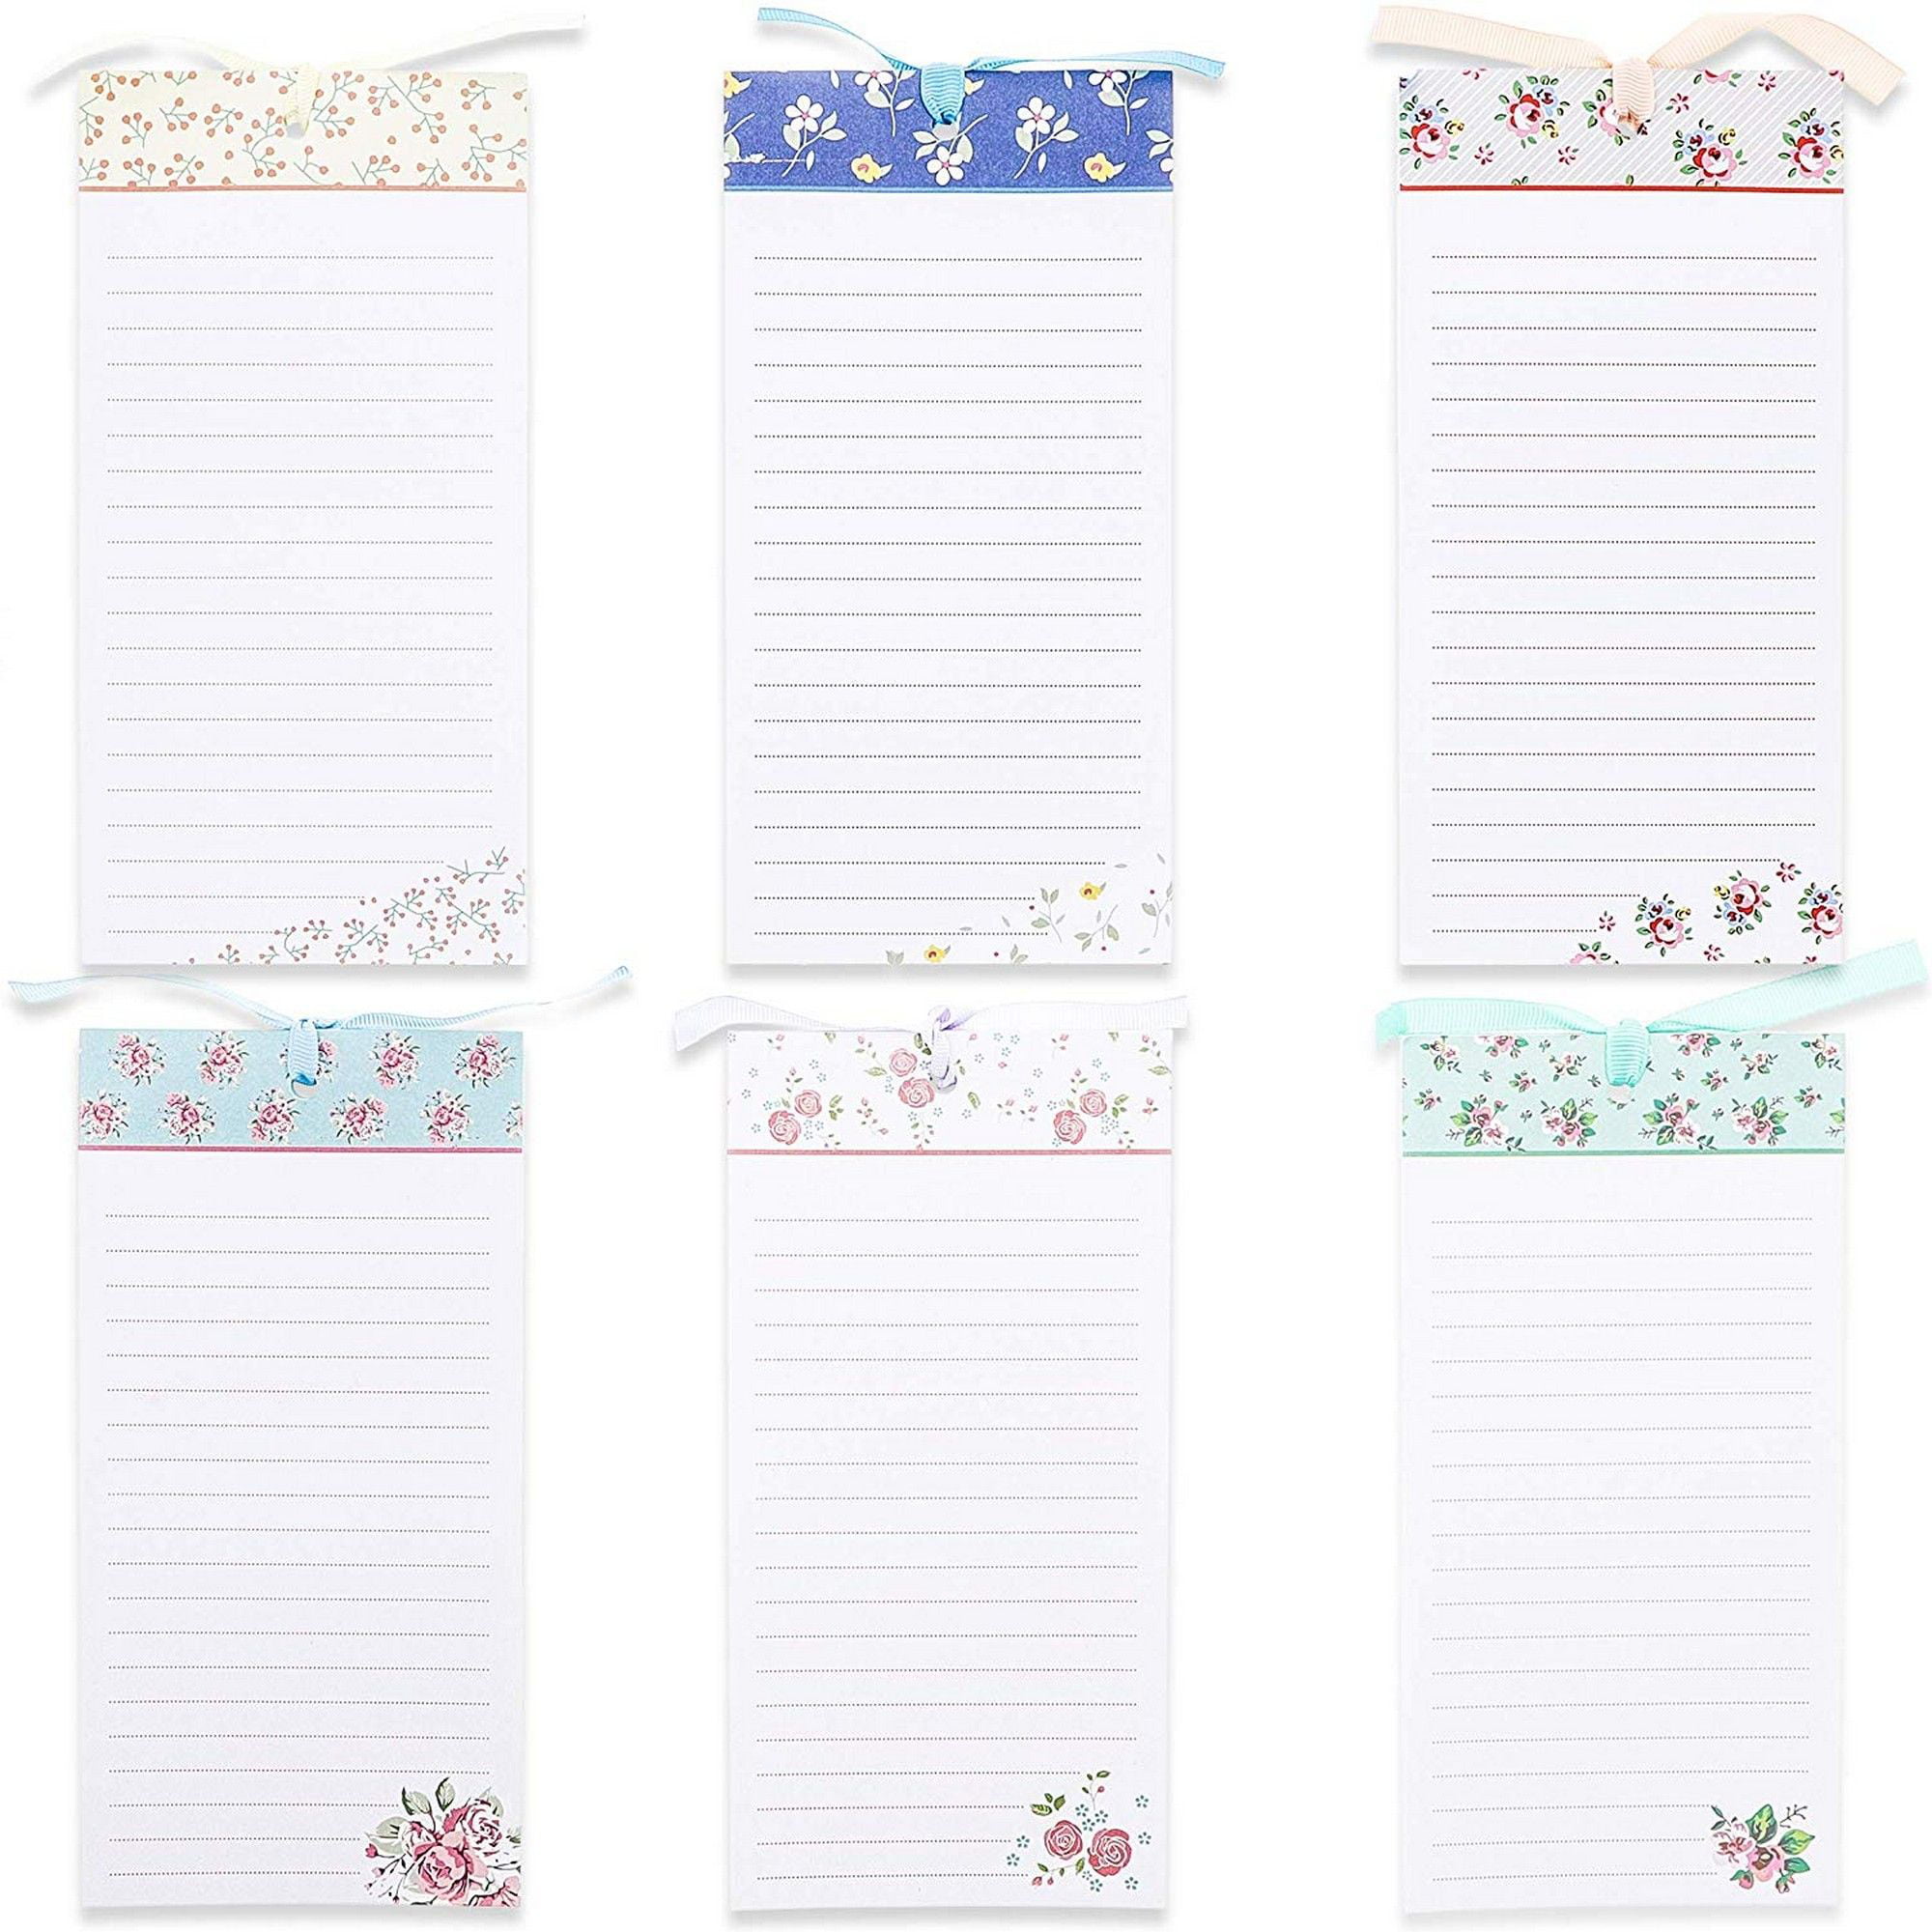 Includes Check Boxes Magnetic Shopping List Note Pad Floral Pastel Design 